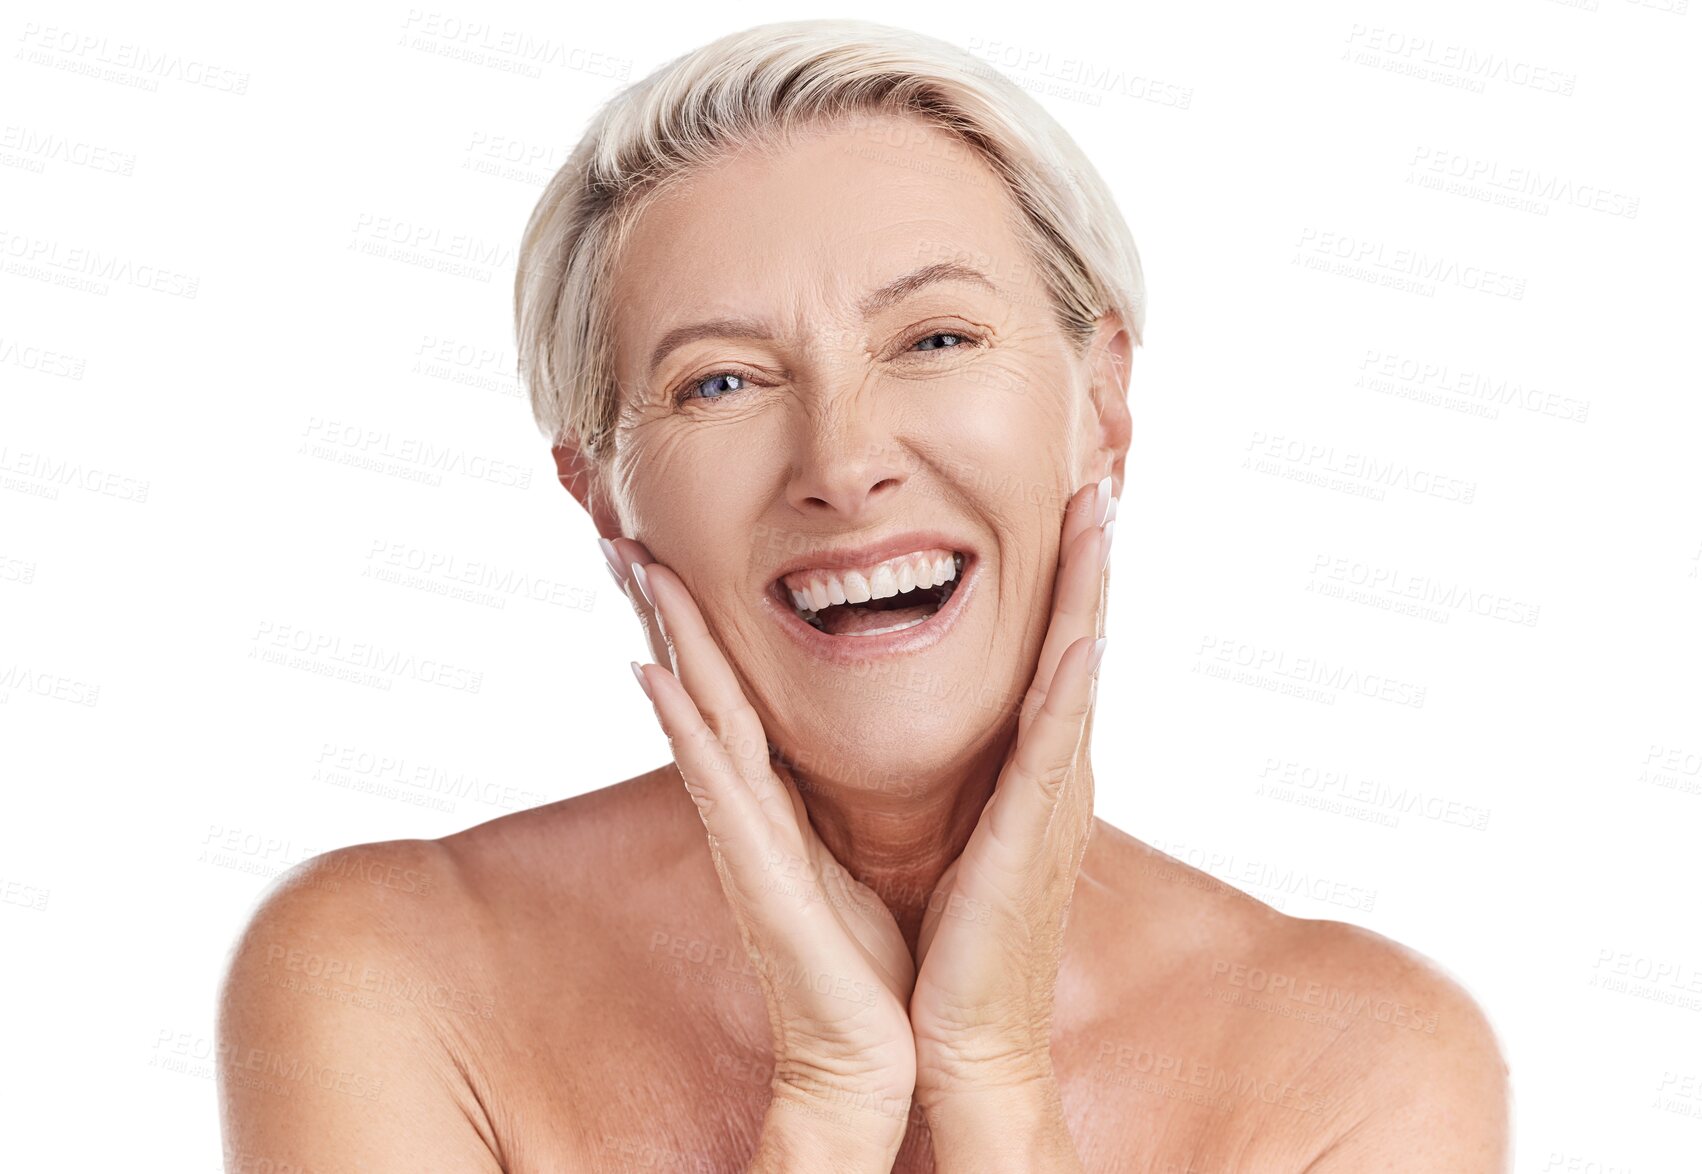 Buy stock photo Happy mature woman, skincare and smile for beauty cosmetics isolated on a transparent PNG background. Portrait of senior or elderly female person smiling for perfect skin or healthy facial treatment